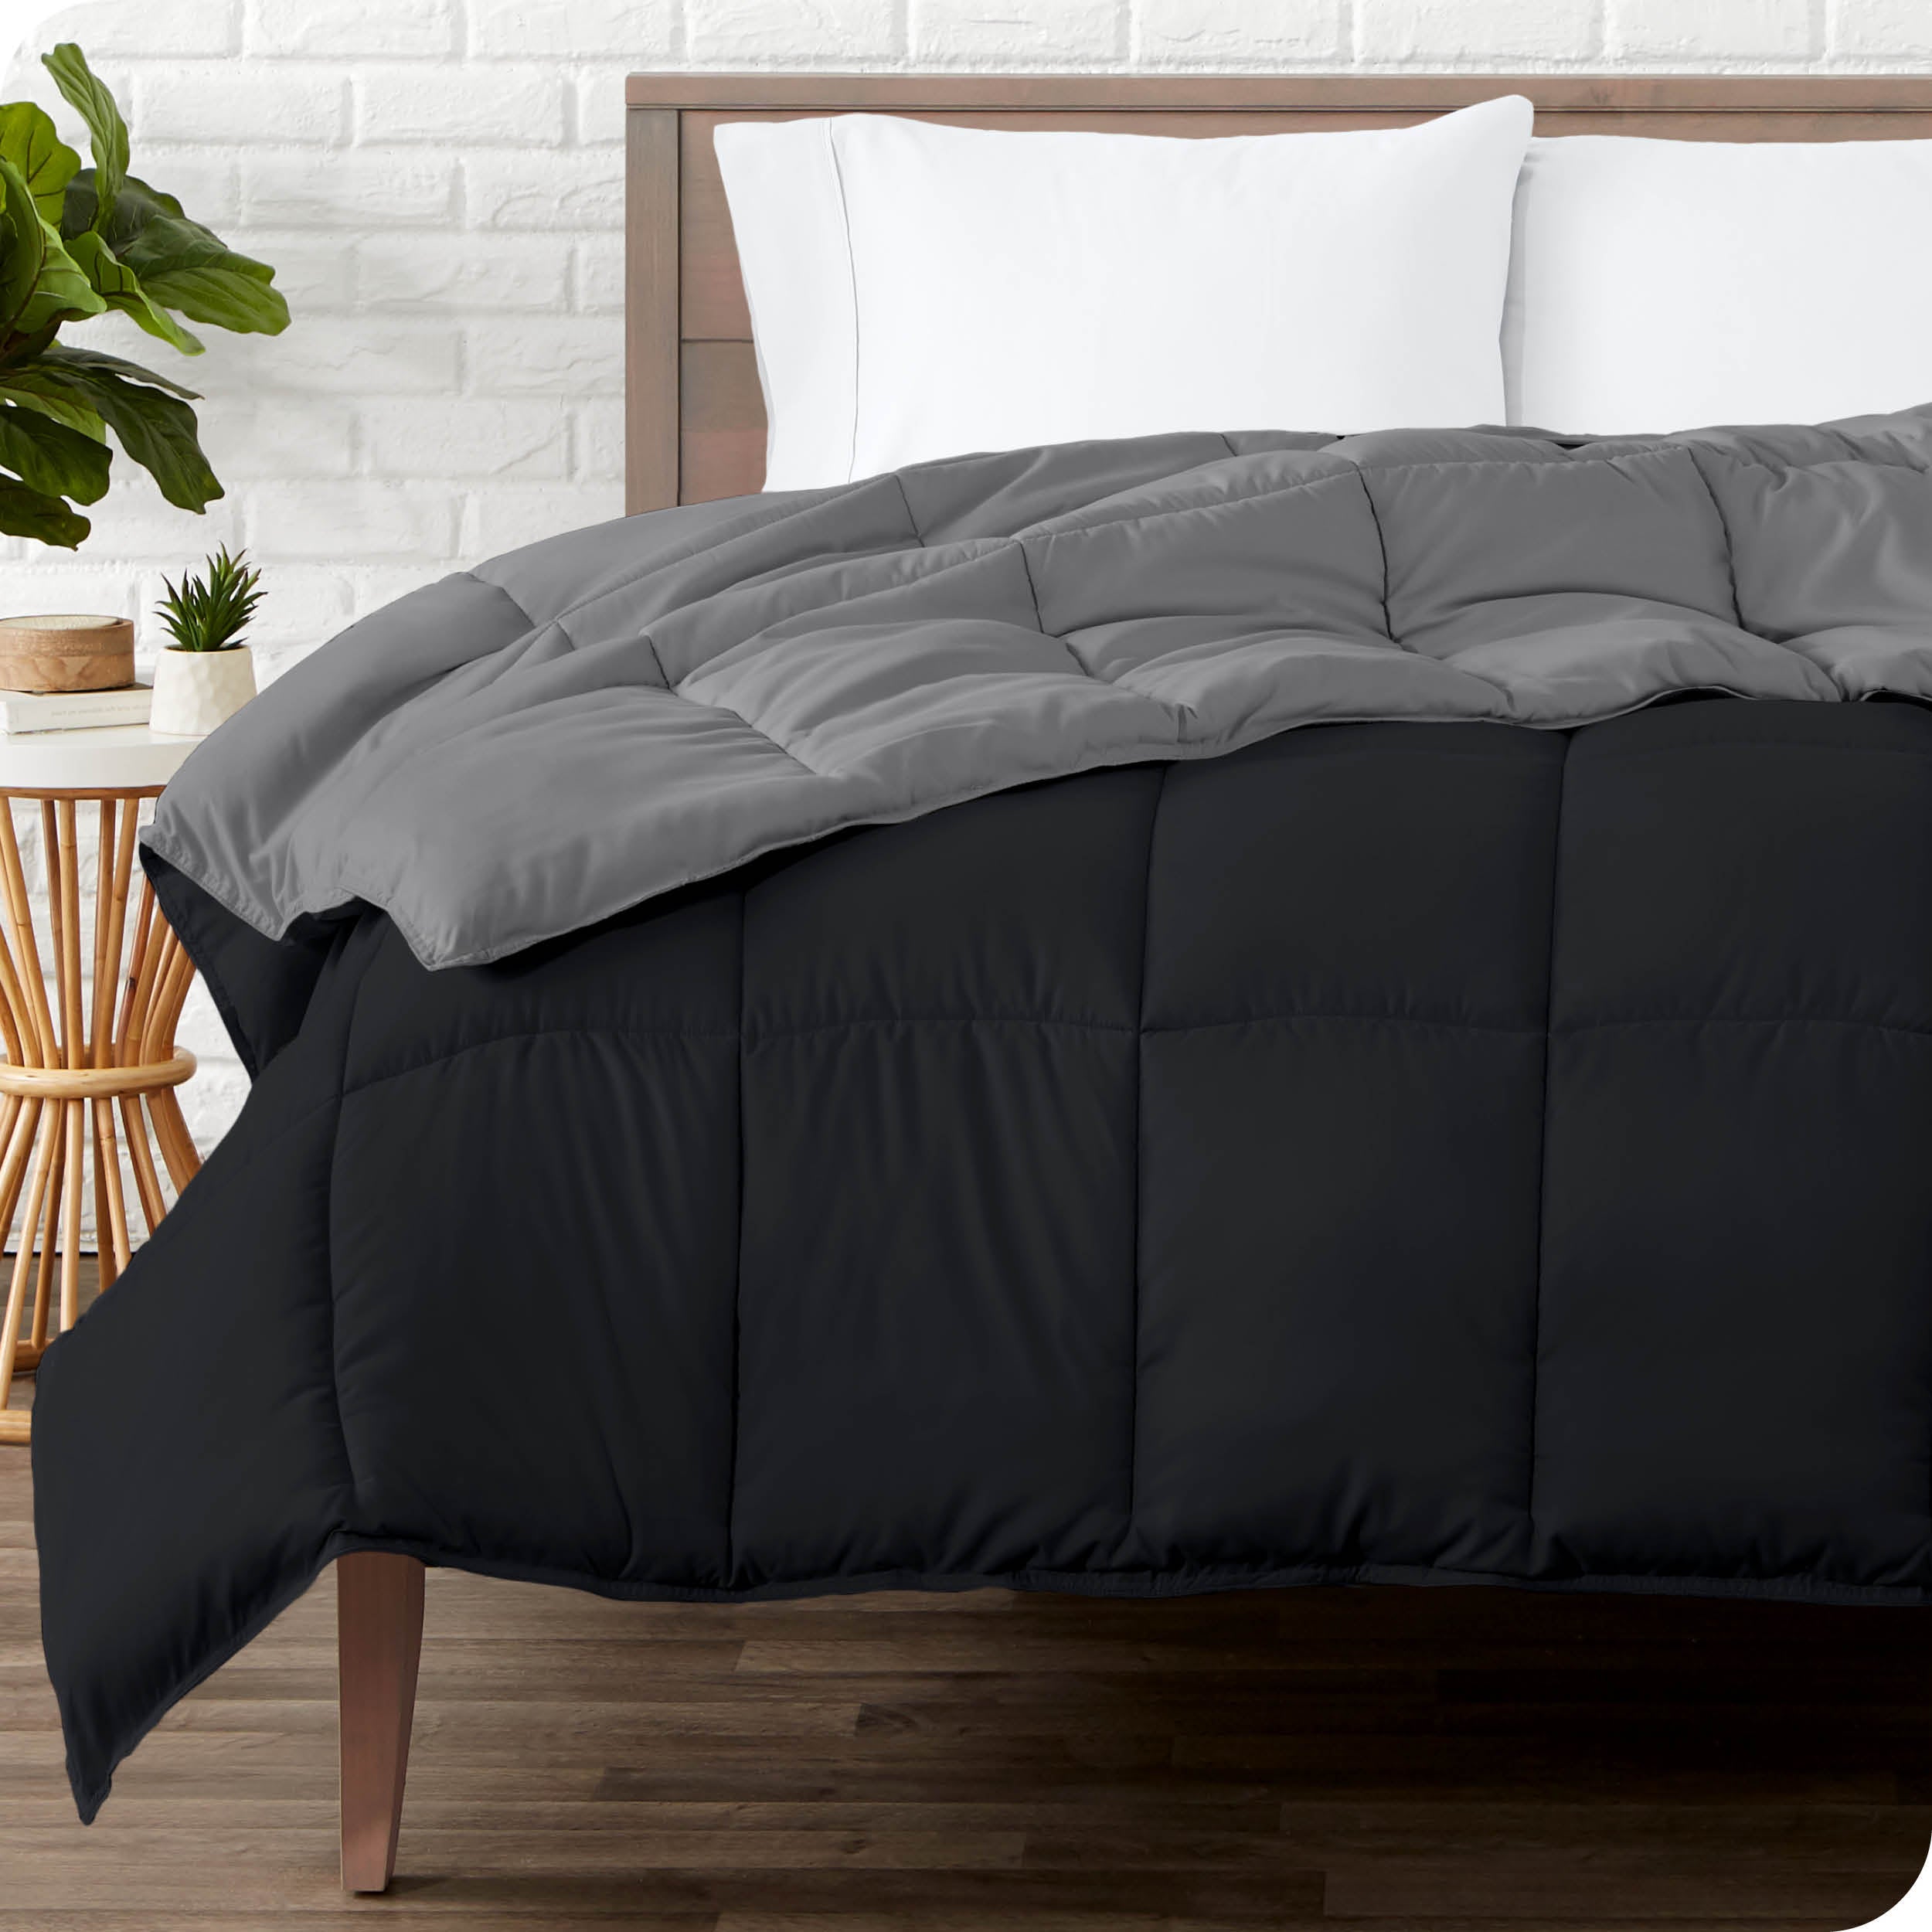 Wooden bed frame with a reversible comforter on the mattress. The comforter is folded back showing the two different colored sides.